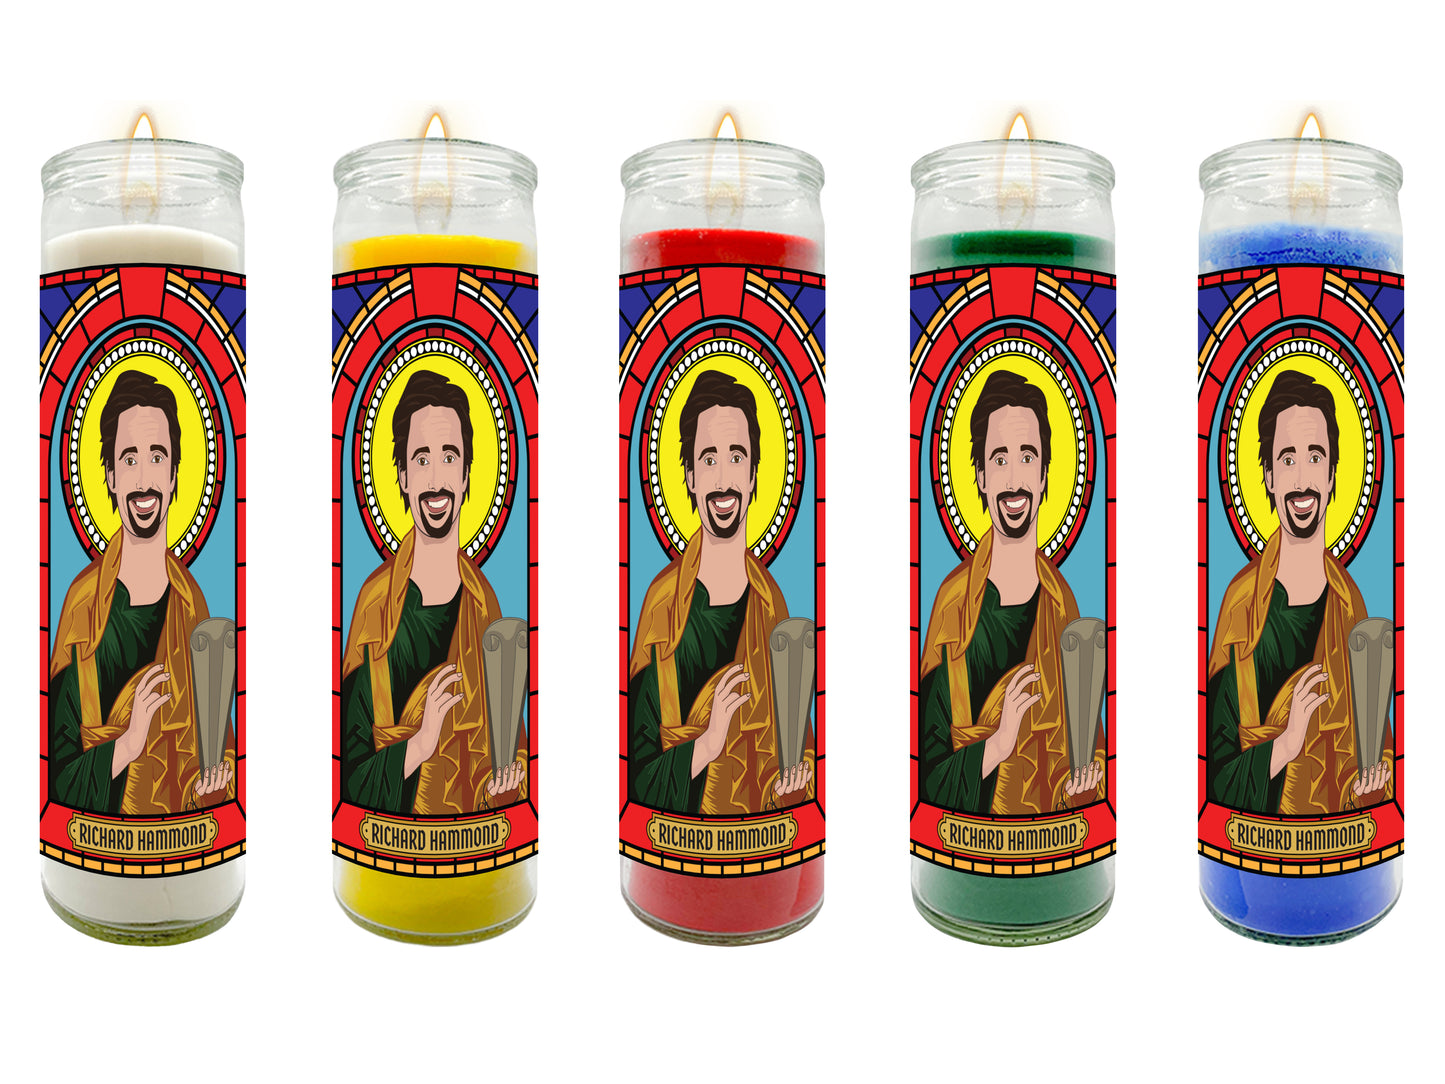 Top Gear / Grand Tour Illustrated Prayer Candle Series